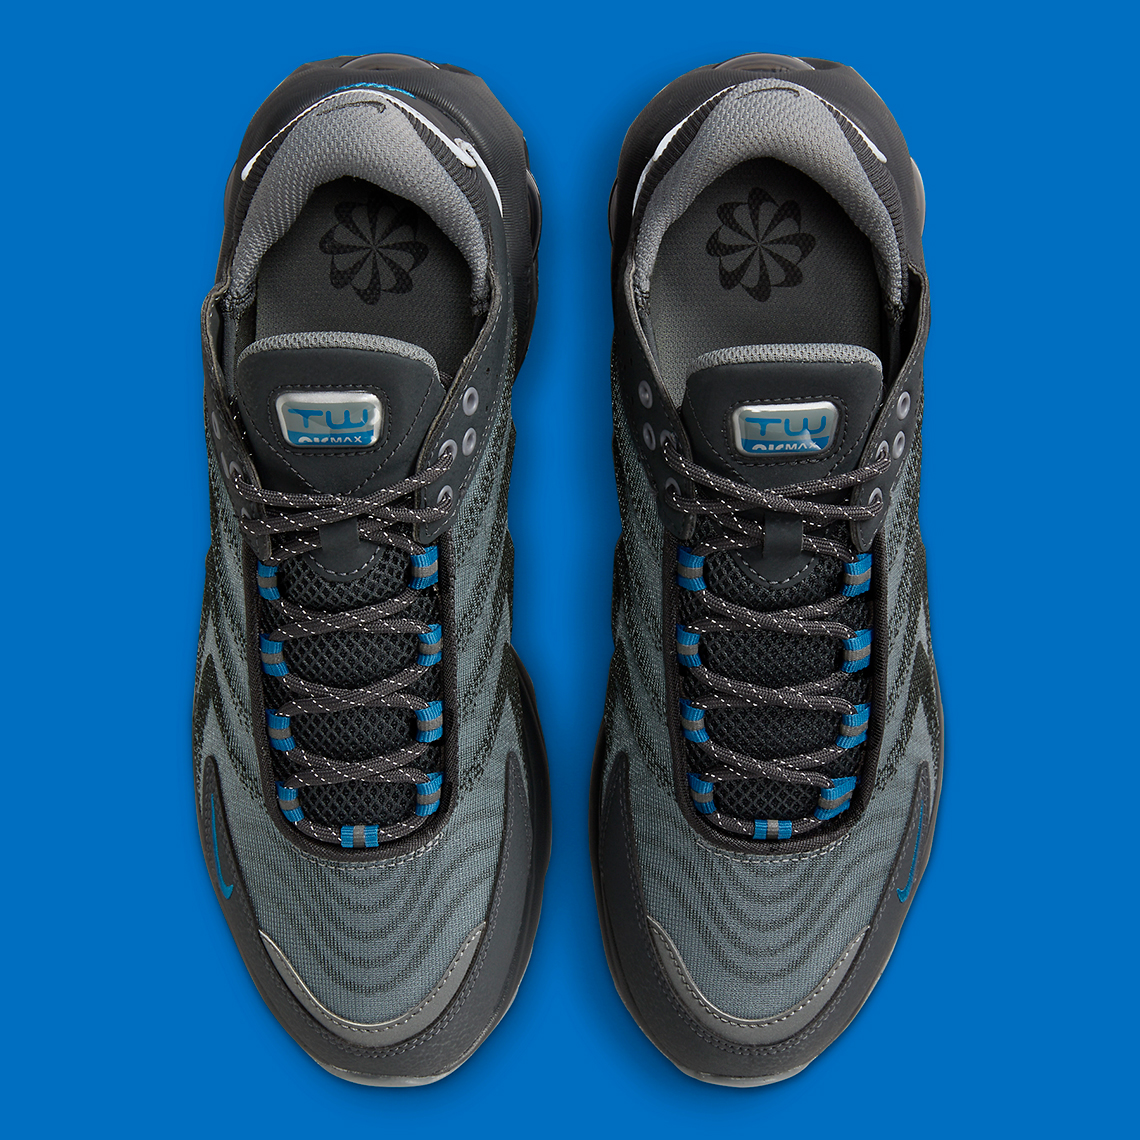 Nike Air technology absorbs impact for cushioning with every step Pulse Grey Black Blue Fv0940 001 4